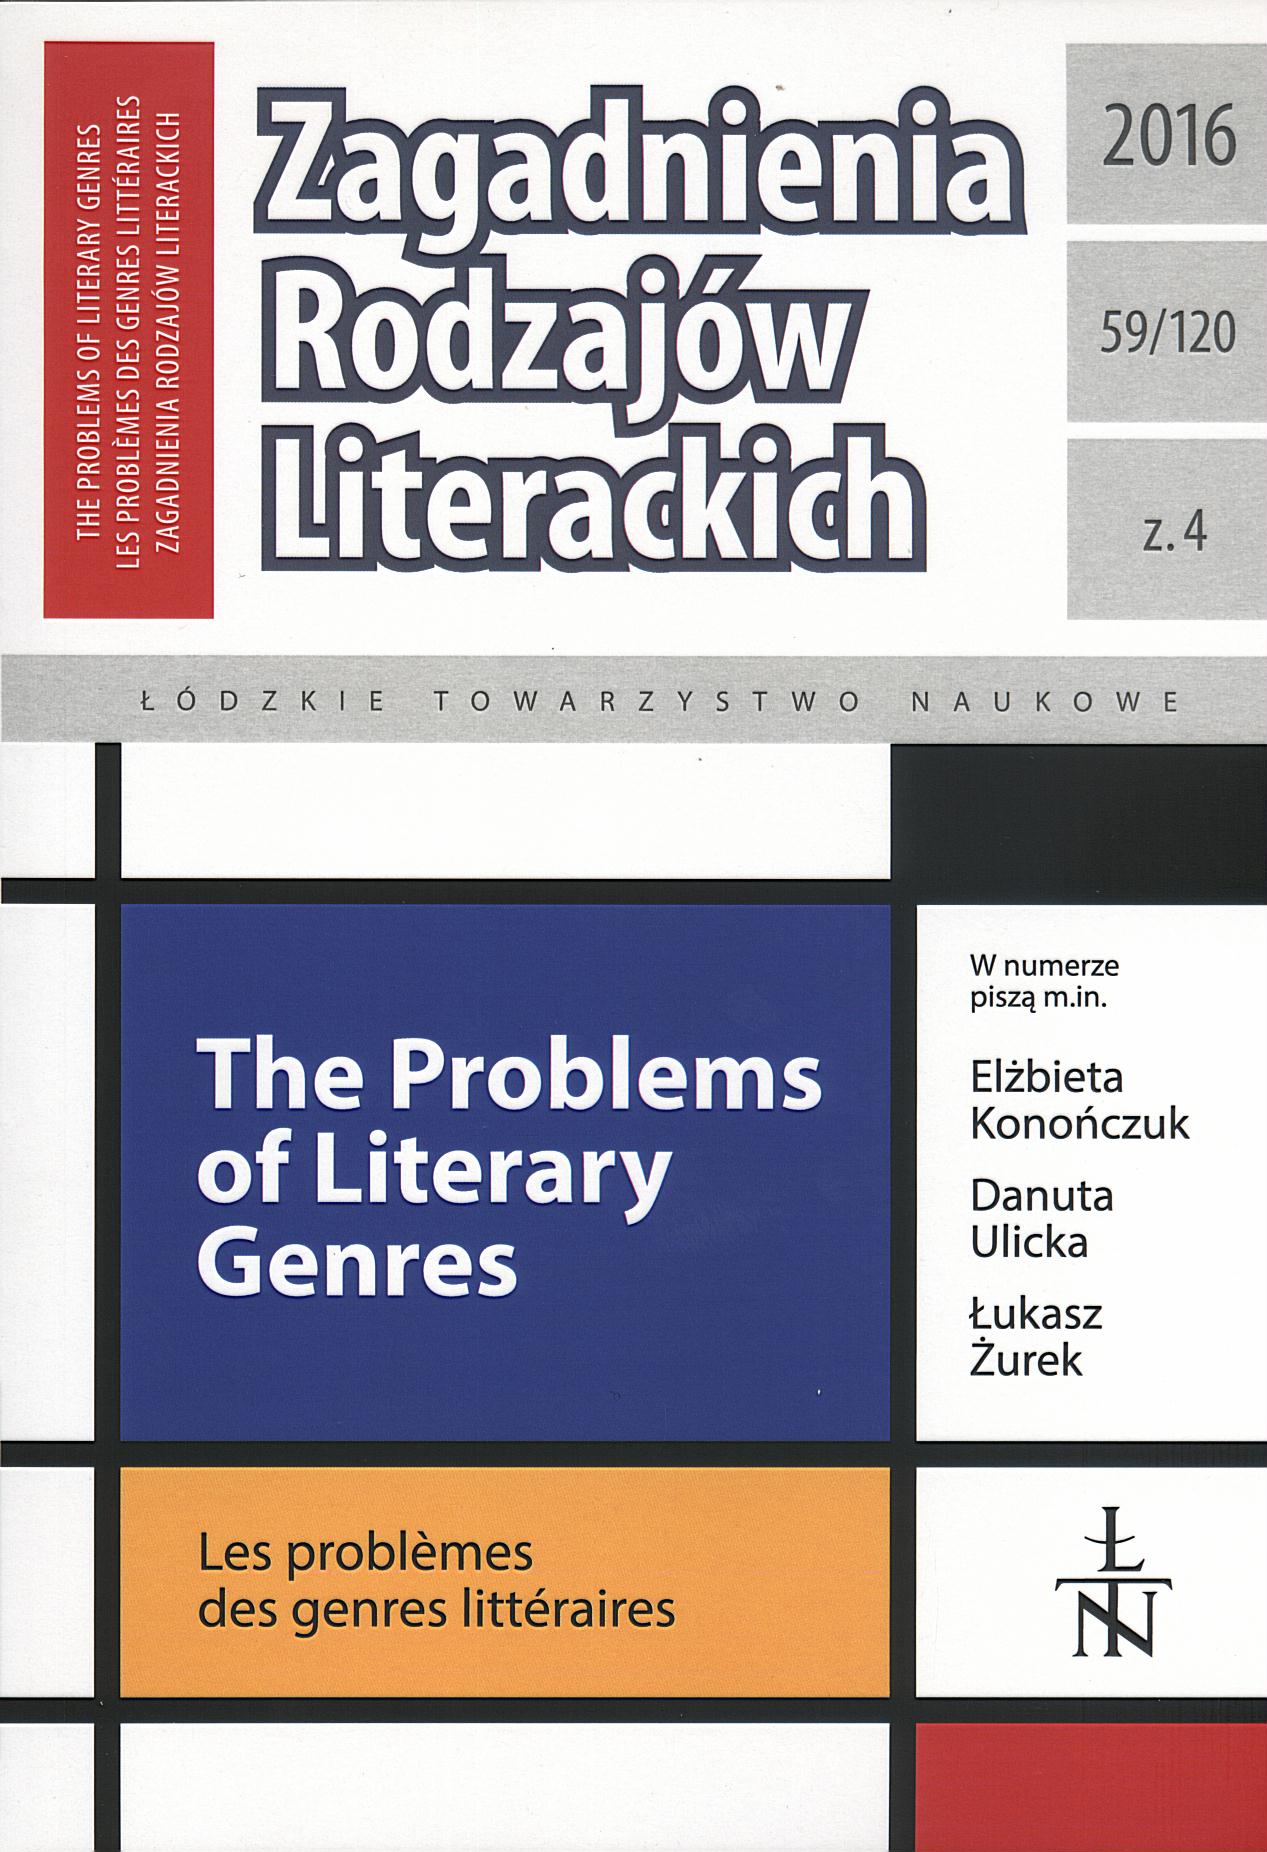 An Academic Discipline at a Crossroads. The Different Approaches to Teaching Literature in Warsaw and in Vilnius in the years 1811‒1830 — an Initial Analysis